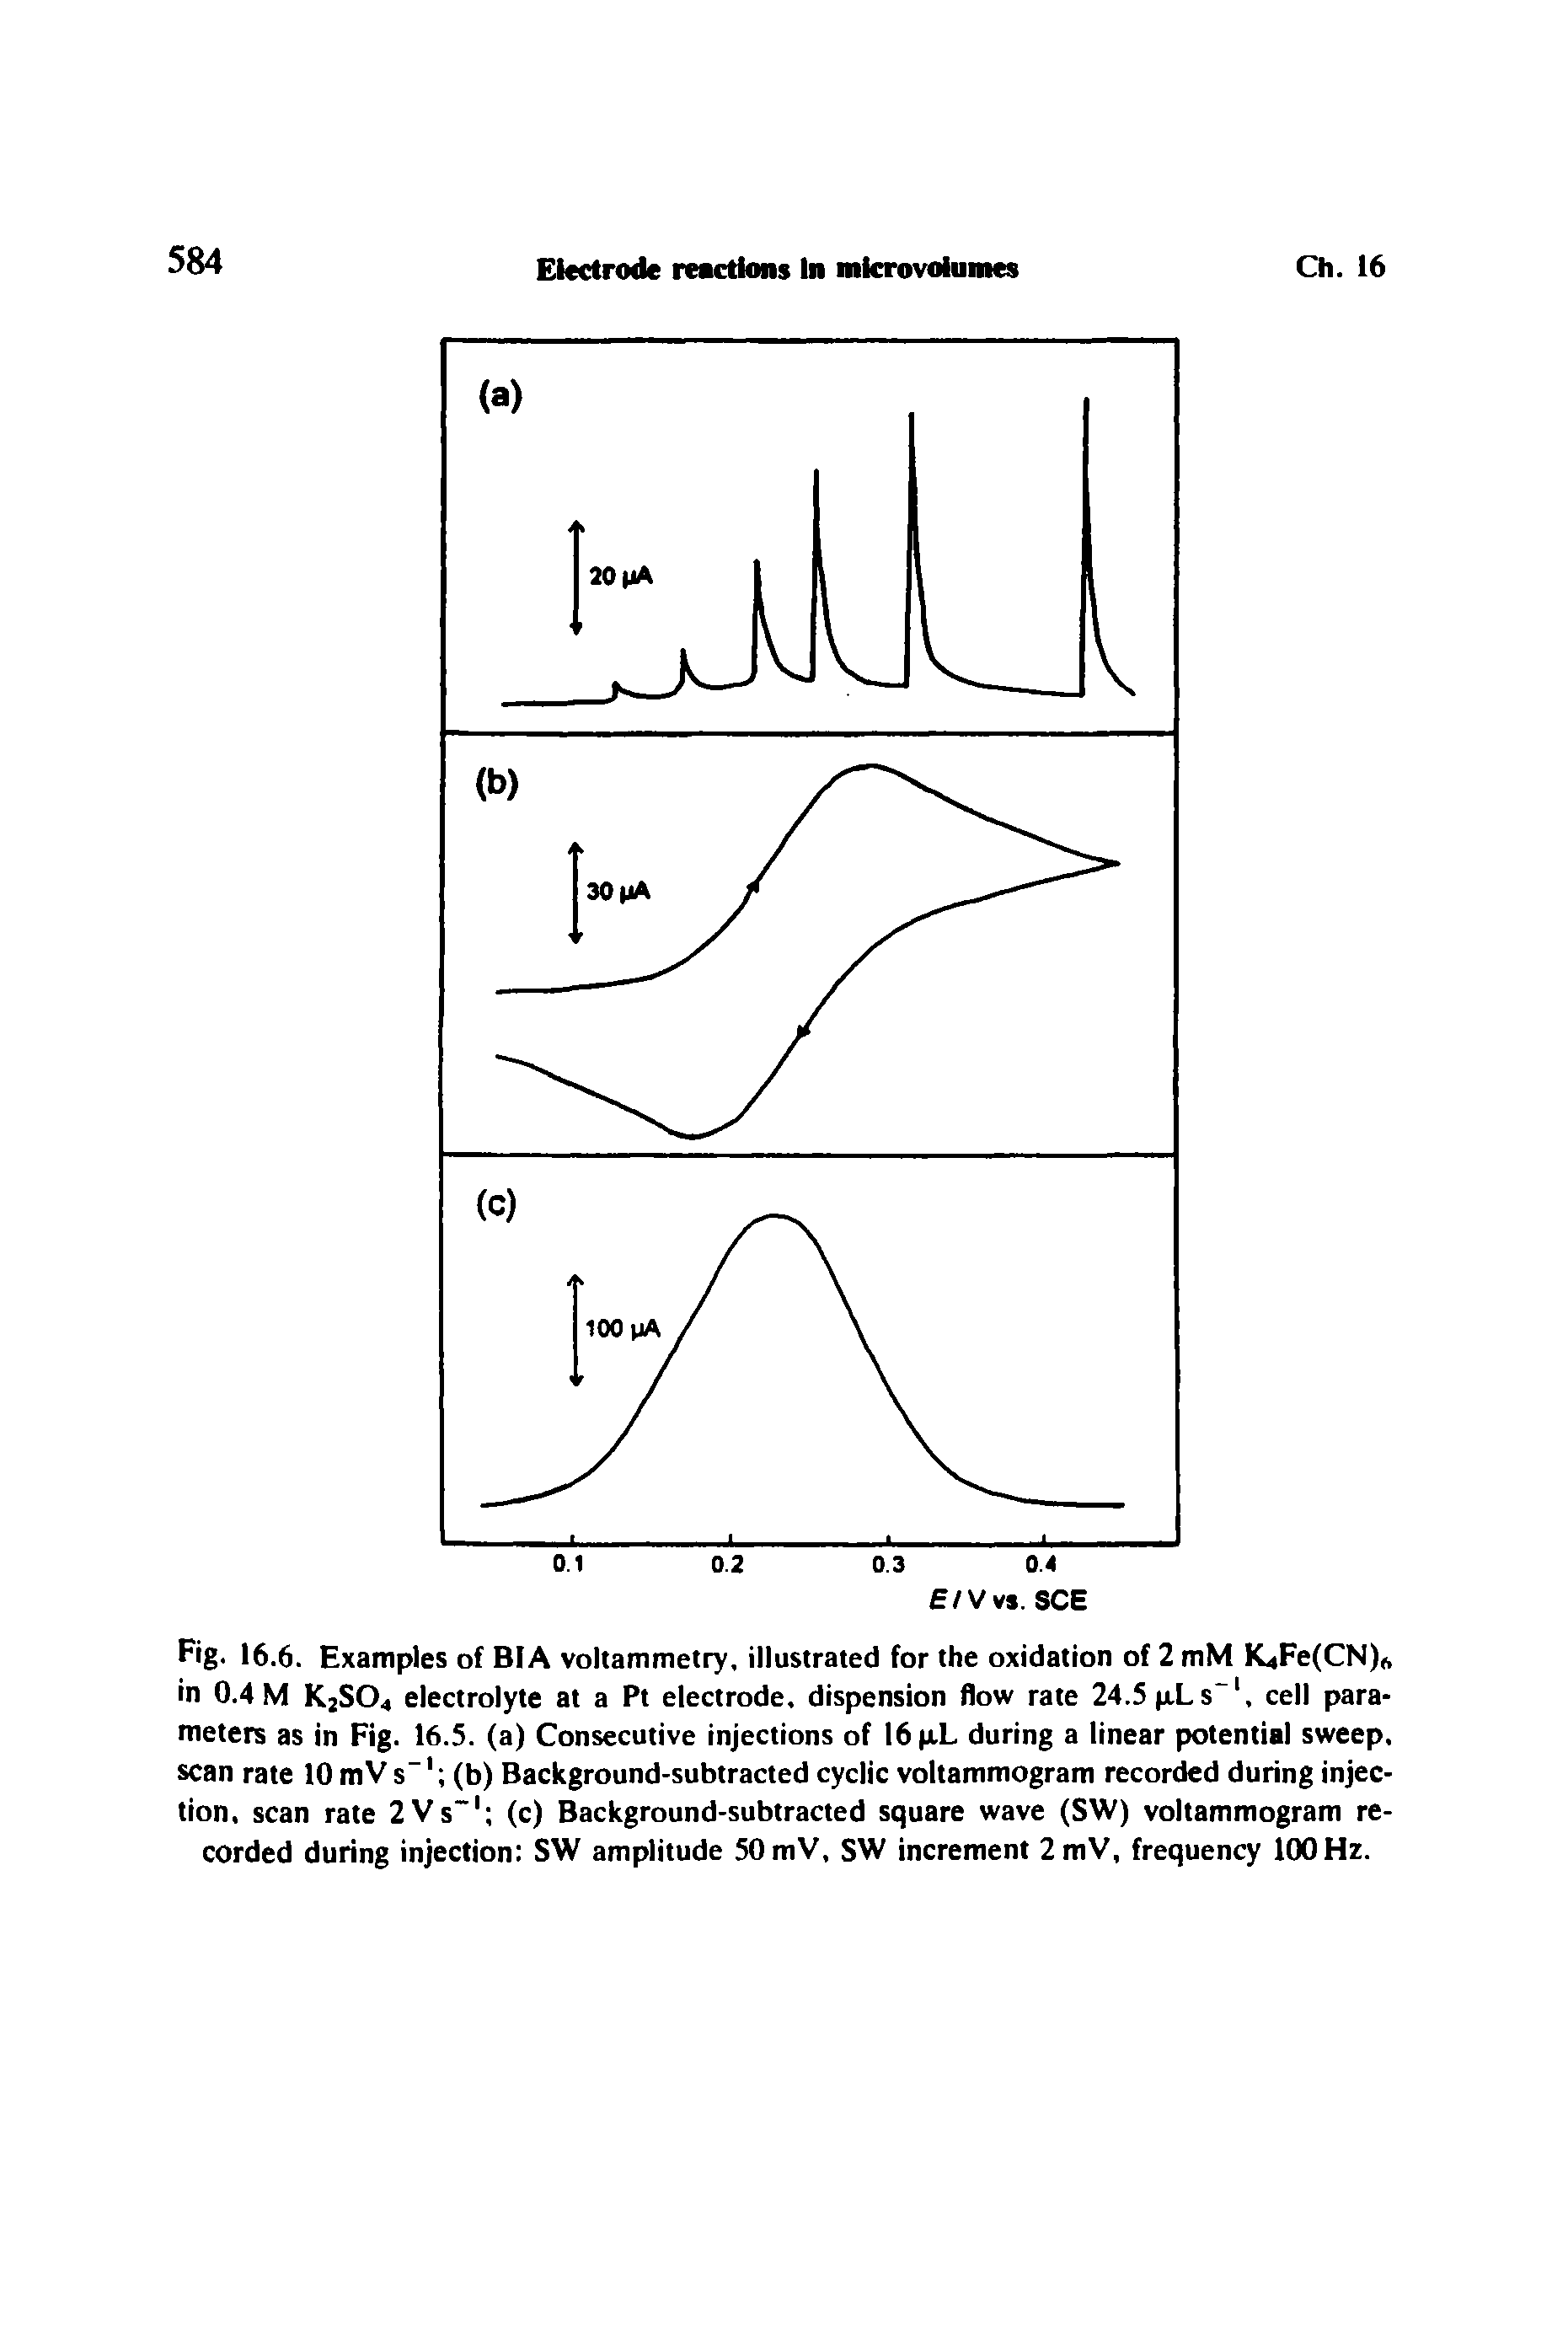 Fig. 16.6. Examples of BIA voltammetry, illustrated for the oxidation of 2 mM K4Fe(CN)6 in 0.4 M K2S04 electrolyte at a Pt electrode, dispension flow rate 24.5 p.Ls , cell parameters as in Fig. 16.5. (a) Consecutive injections of 16 p.L during a linear potential sweep, scan rate 10 mVs l (b) Background-subtracted cyclic voltammogram recorded during injection, scan rate 2 Vs-1 (c) Background-subtracted square wave (SW) voltammogram recorded during injection SW amplitude 50 mV, SW increment 2 mV, frequency 100 Hz.